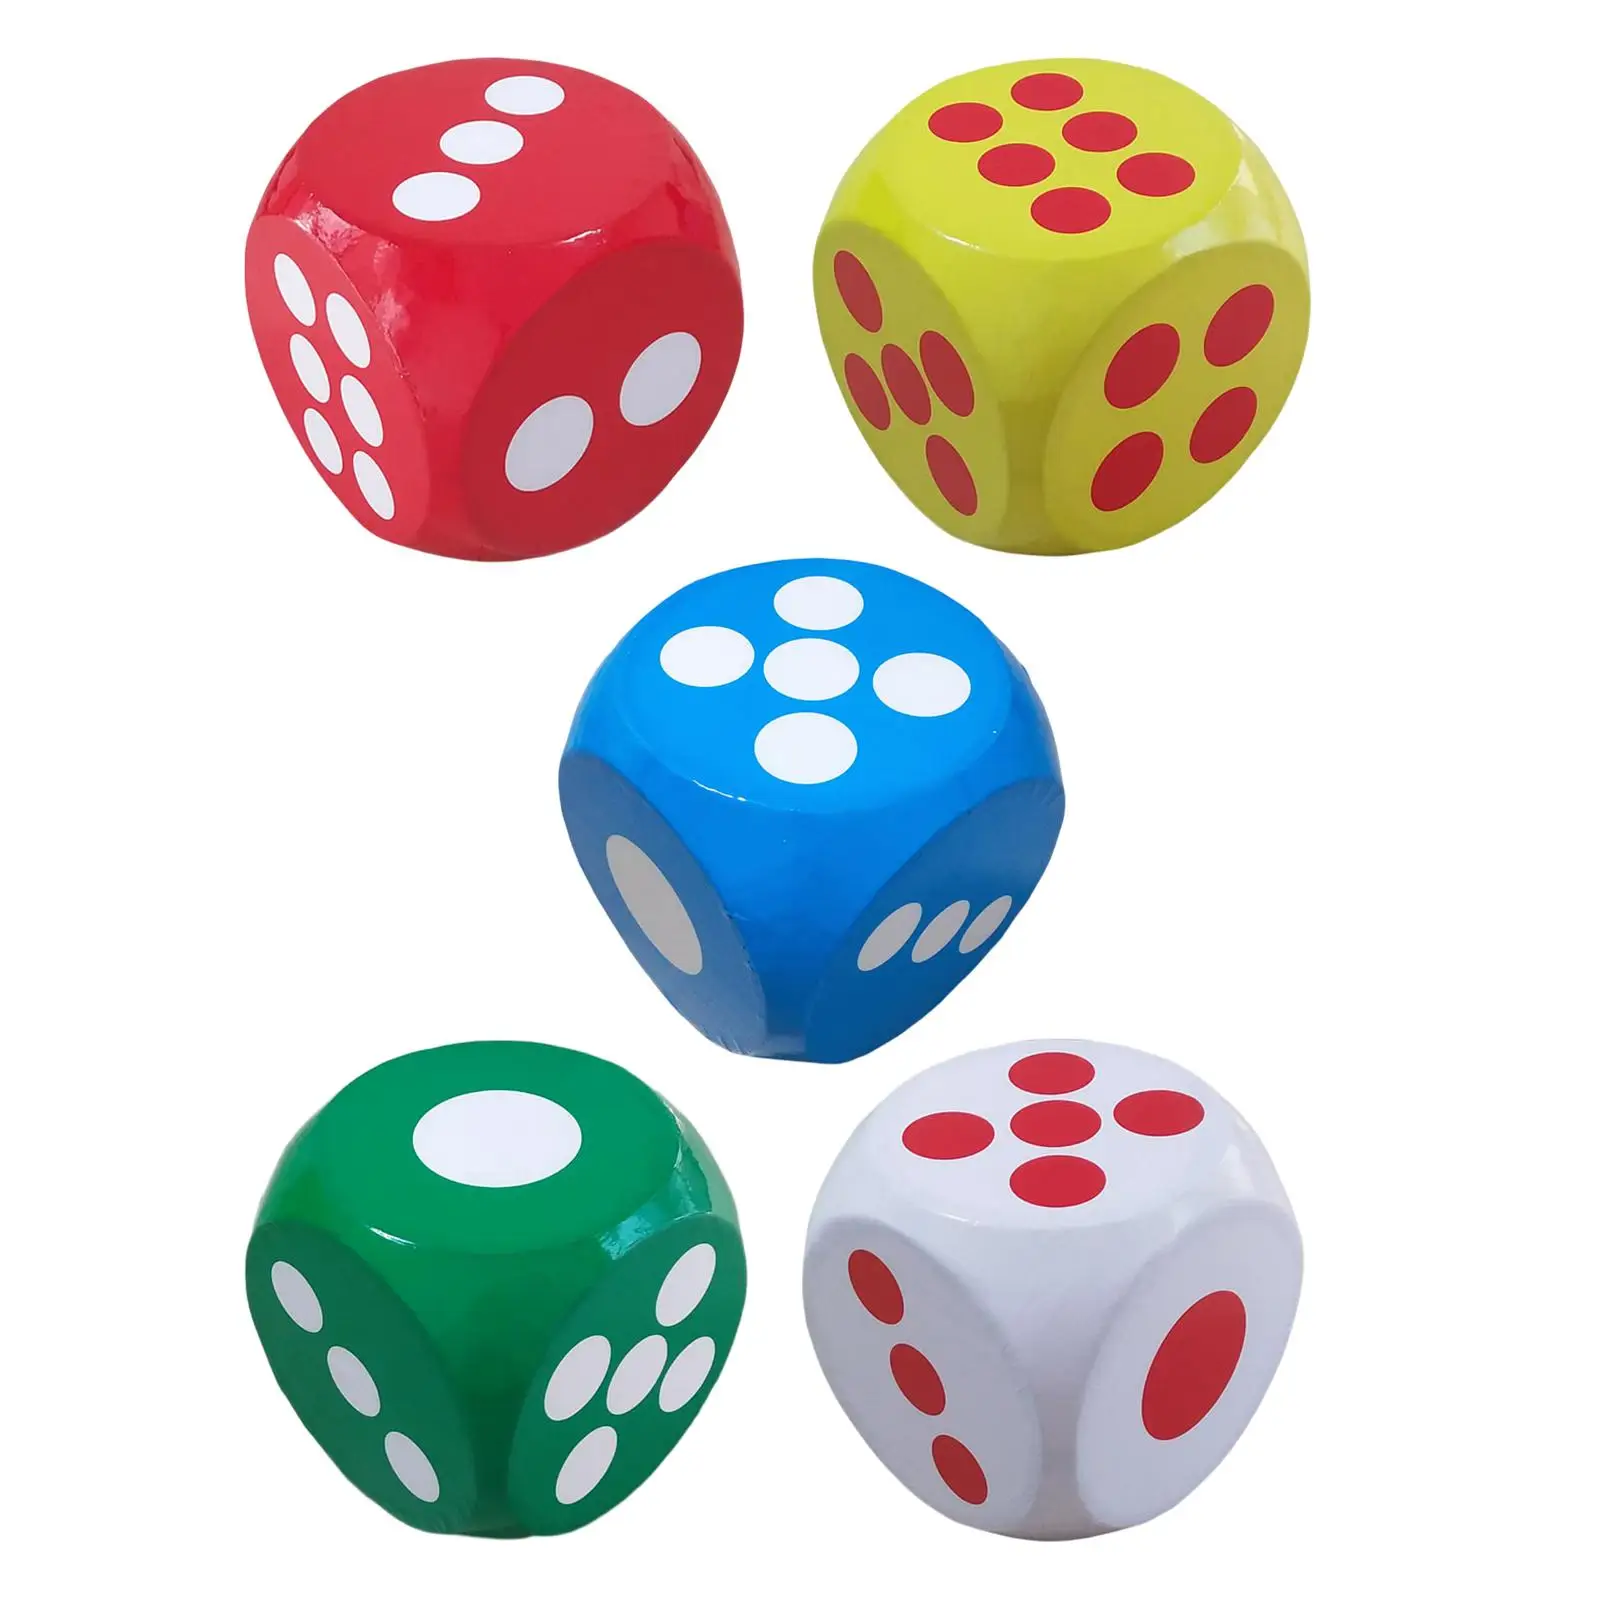 

Foam Dot Dice 5.9 inch Large Dice Cubes Early Learning Toys Teaching Aids Game